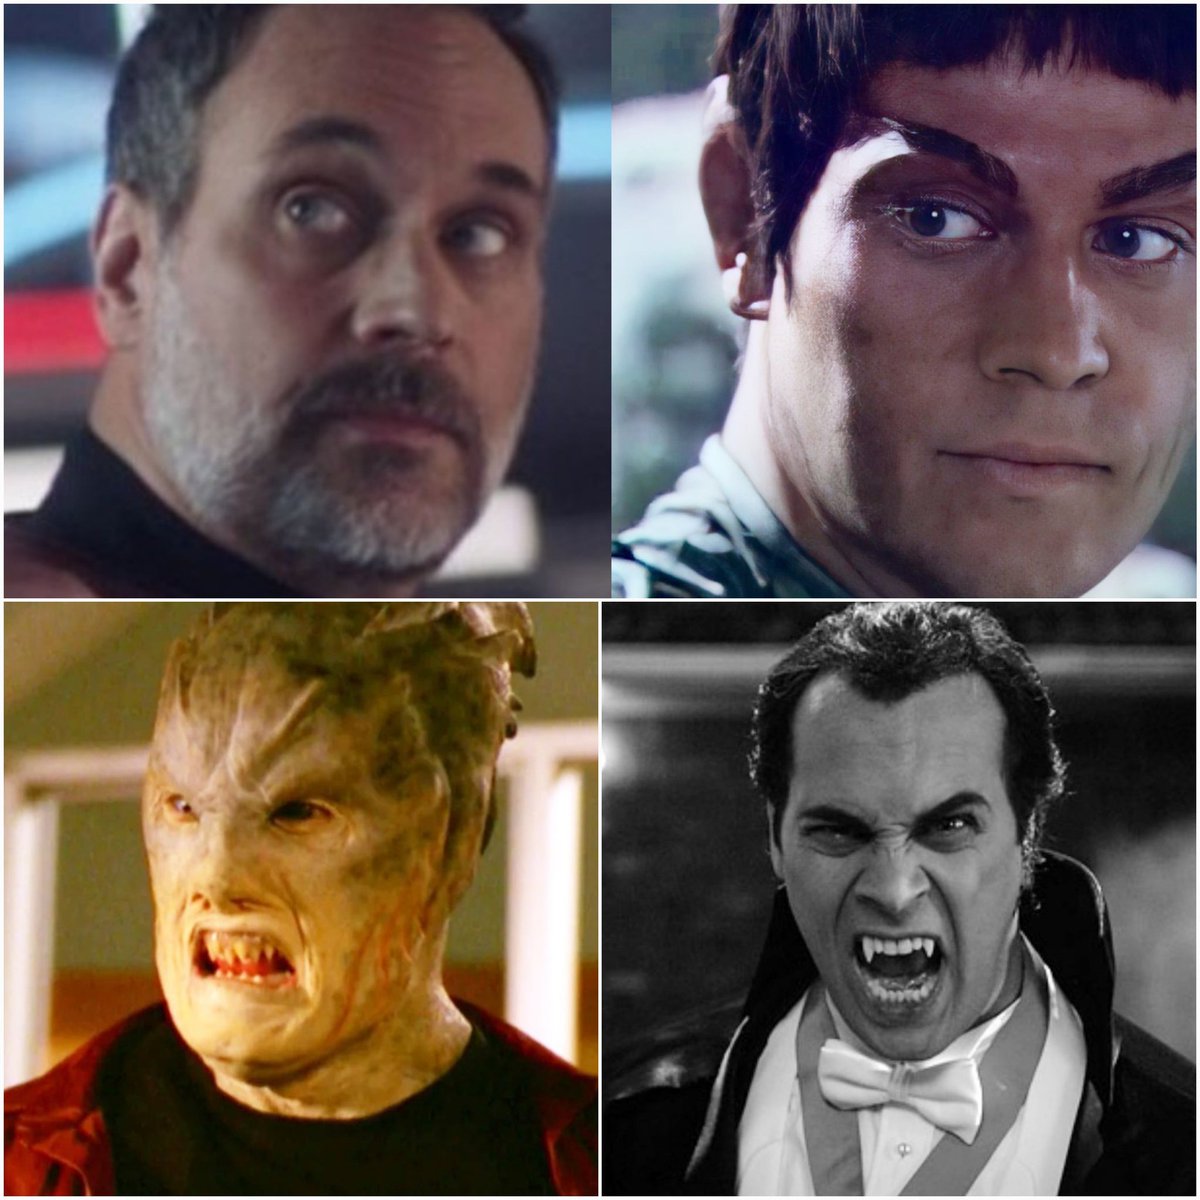 @ToddStashwick @gladysmagazine Ummmm @ToddStashwick how did I not know about enterprise, Buffy, and your supernatural appearances? This is awesome!